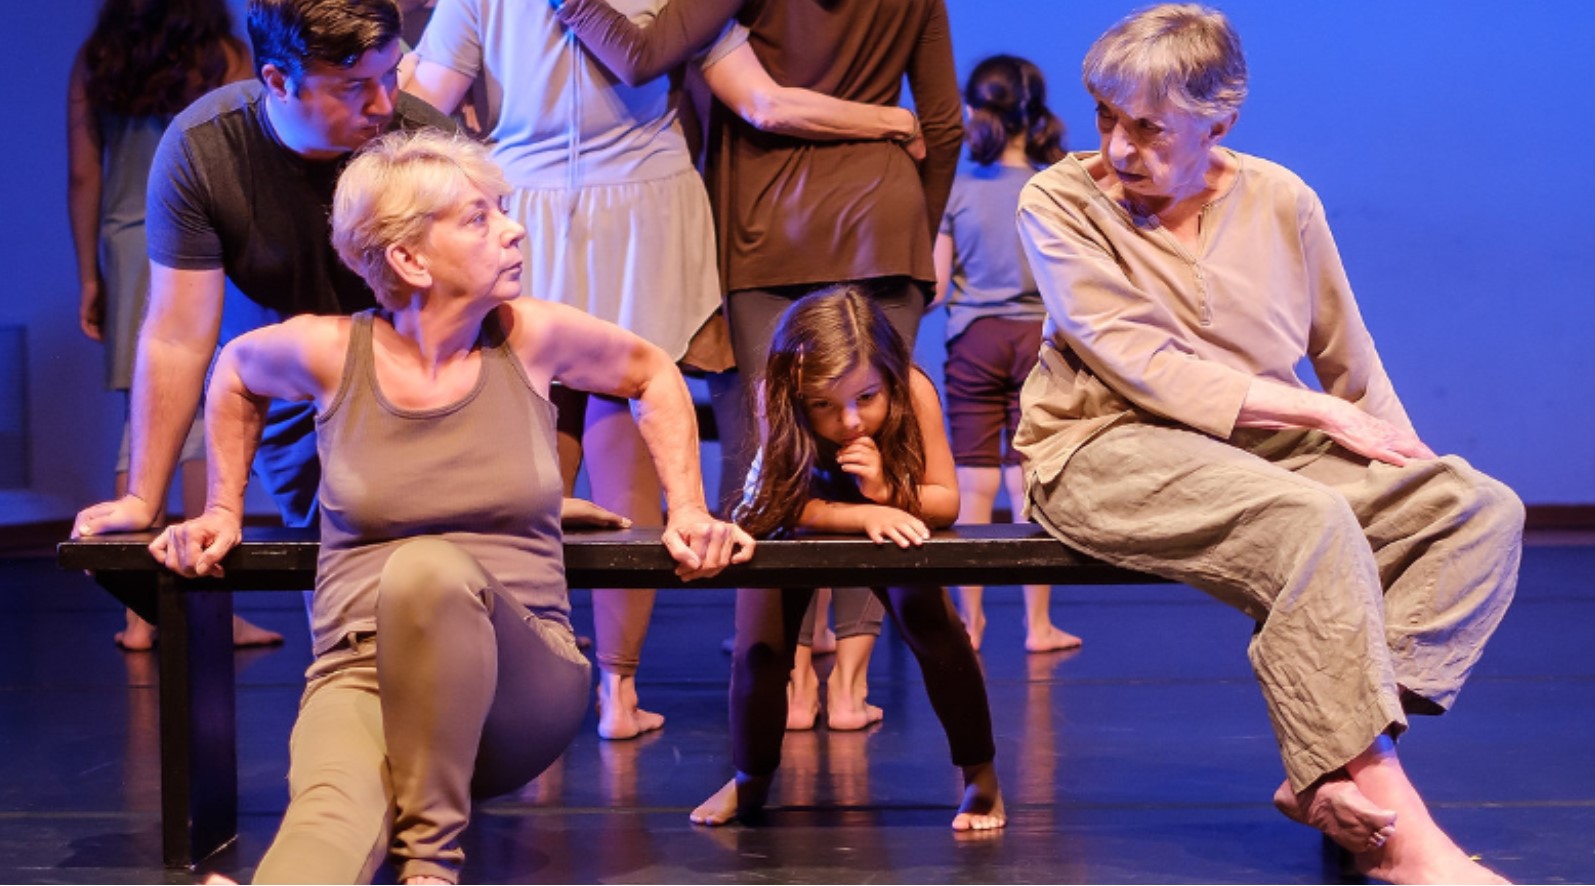 On a dance floor, under stage lighting, two older women are at opposite ends of a bench with a small child between them. The lady on the left is dipping her body in front of the bench with her hands and arms behind her, she looks directly into the eyes of the other lady who sits on the bench. The little girl stands behind the bench leaning on it with her elbows.